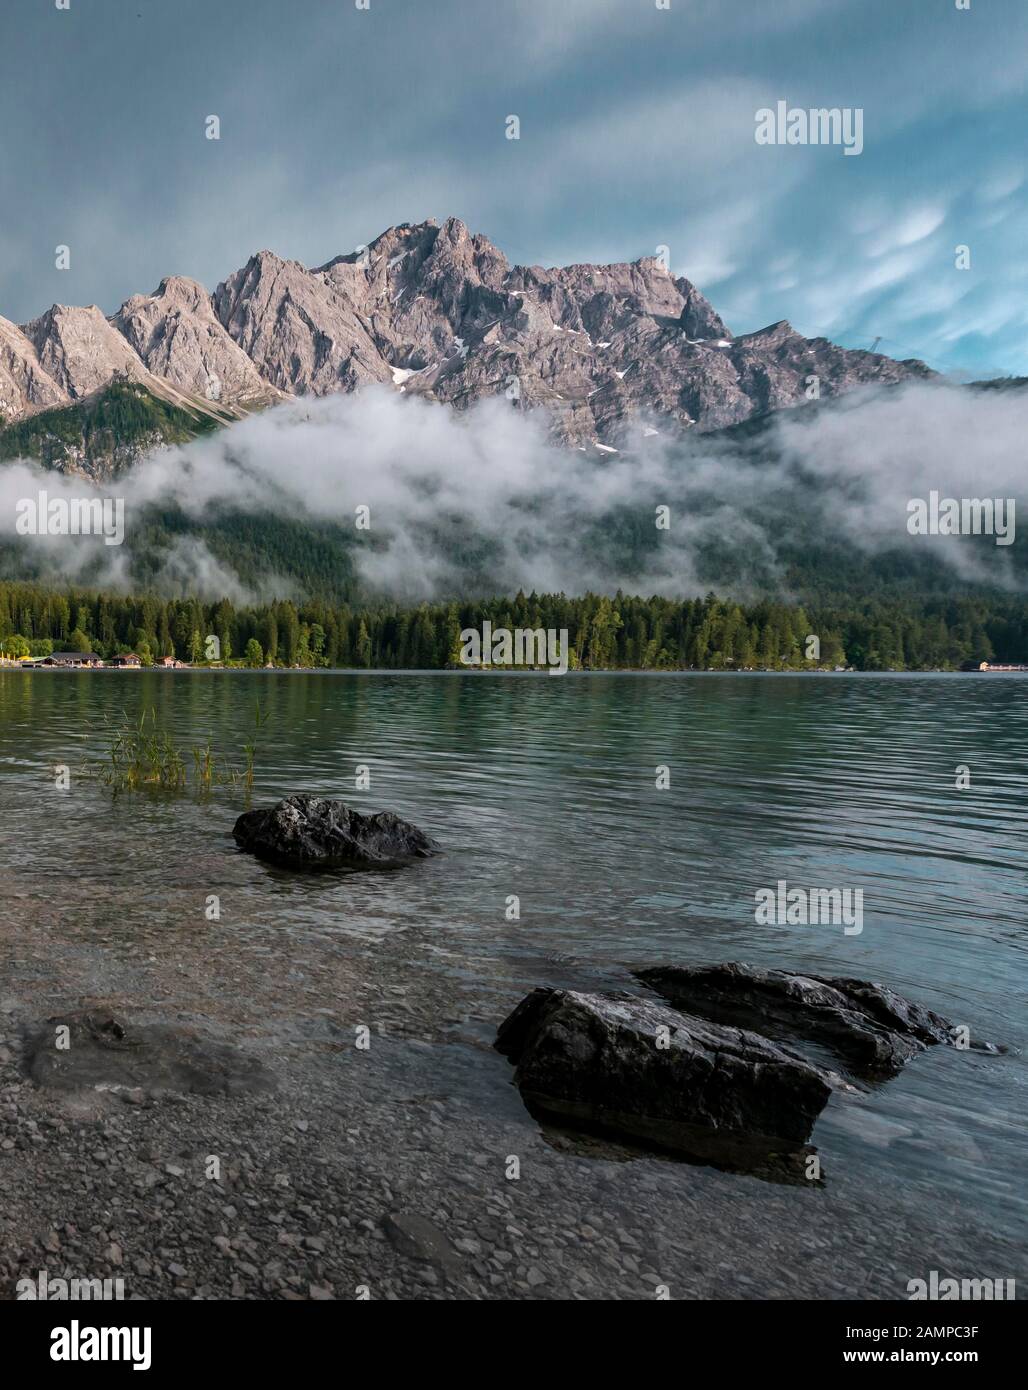 Rocks on the shore, Eibsee lake in front of Zugspitze massif with Zugspitze, low hanging clouds, Wetterstein range, near Grainau, Upper Bavaria Stock Photo